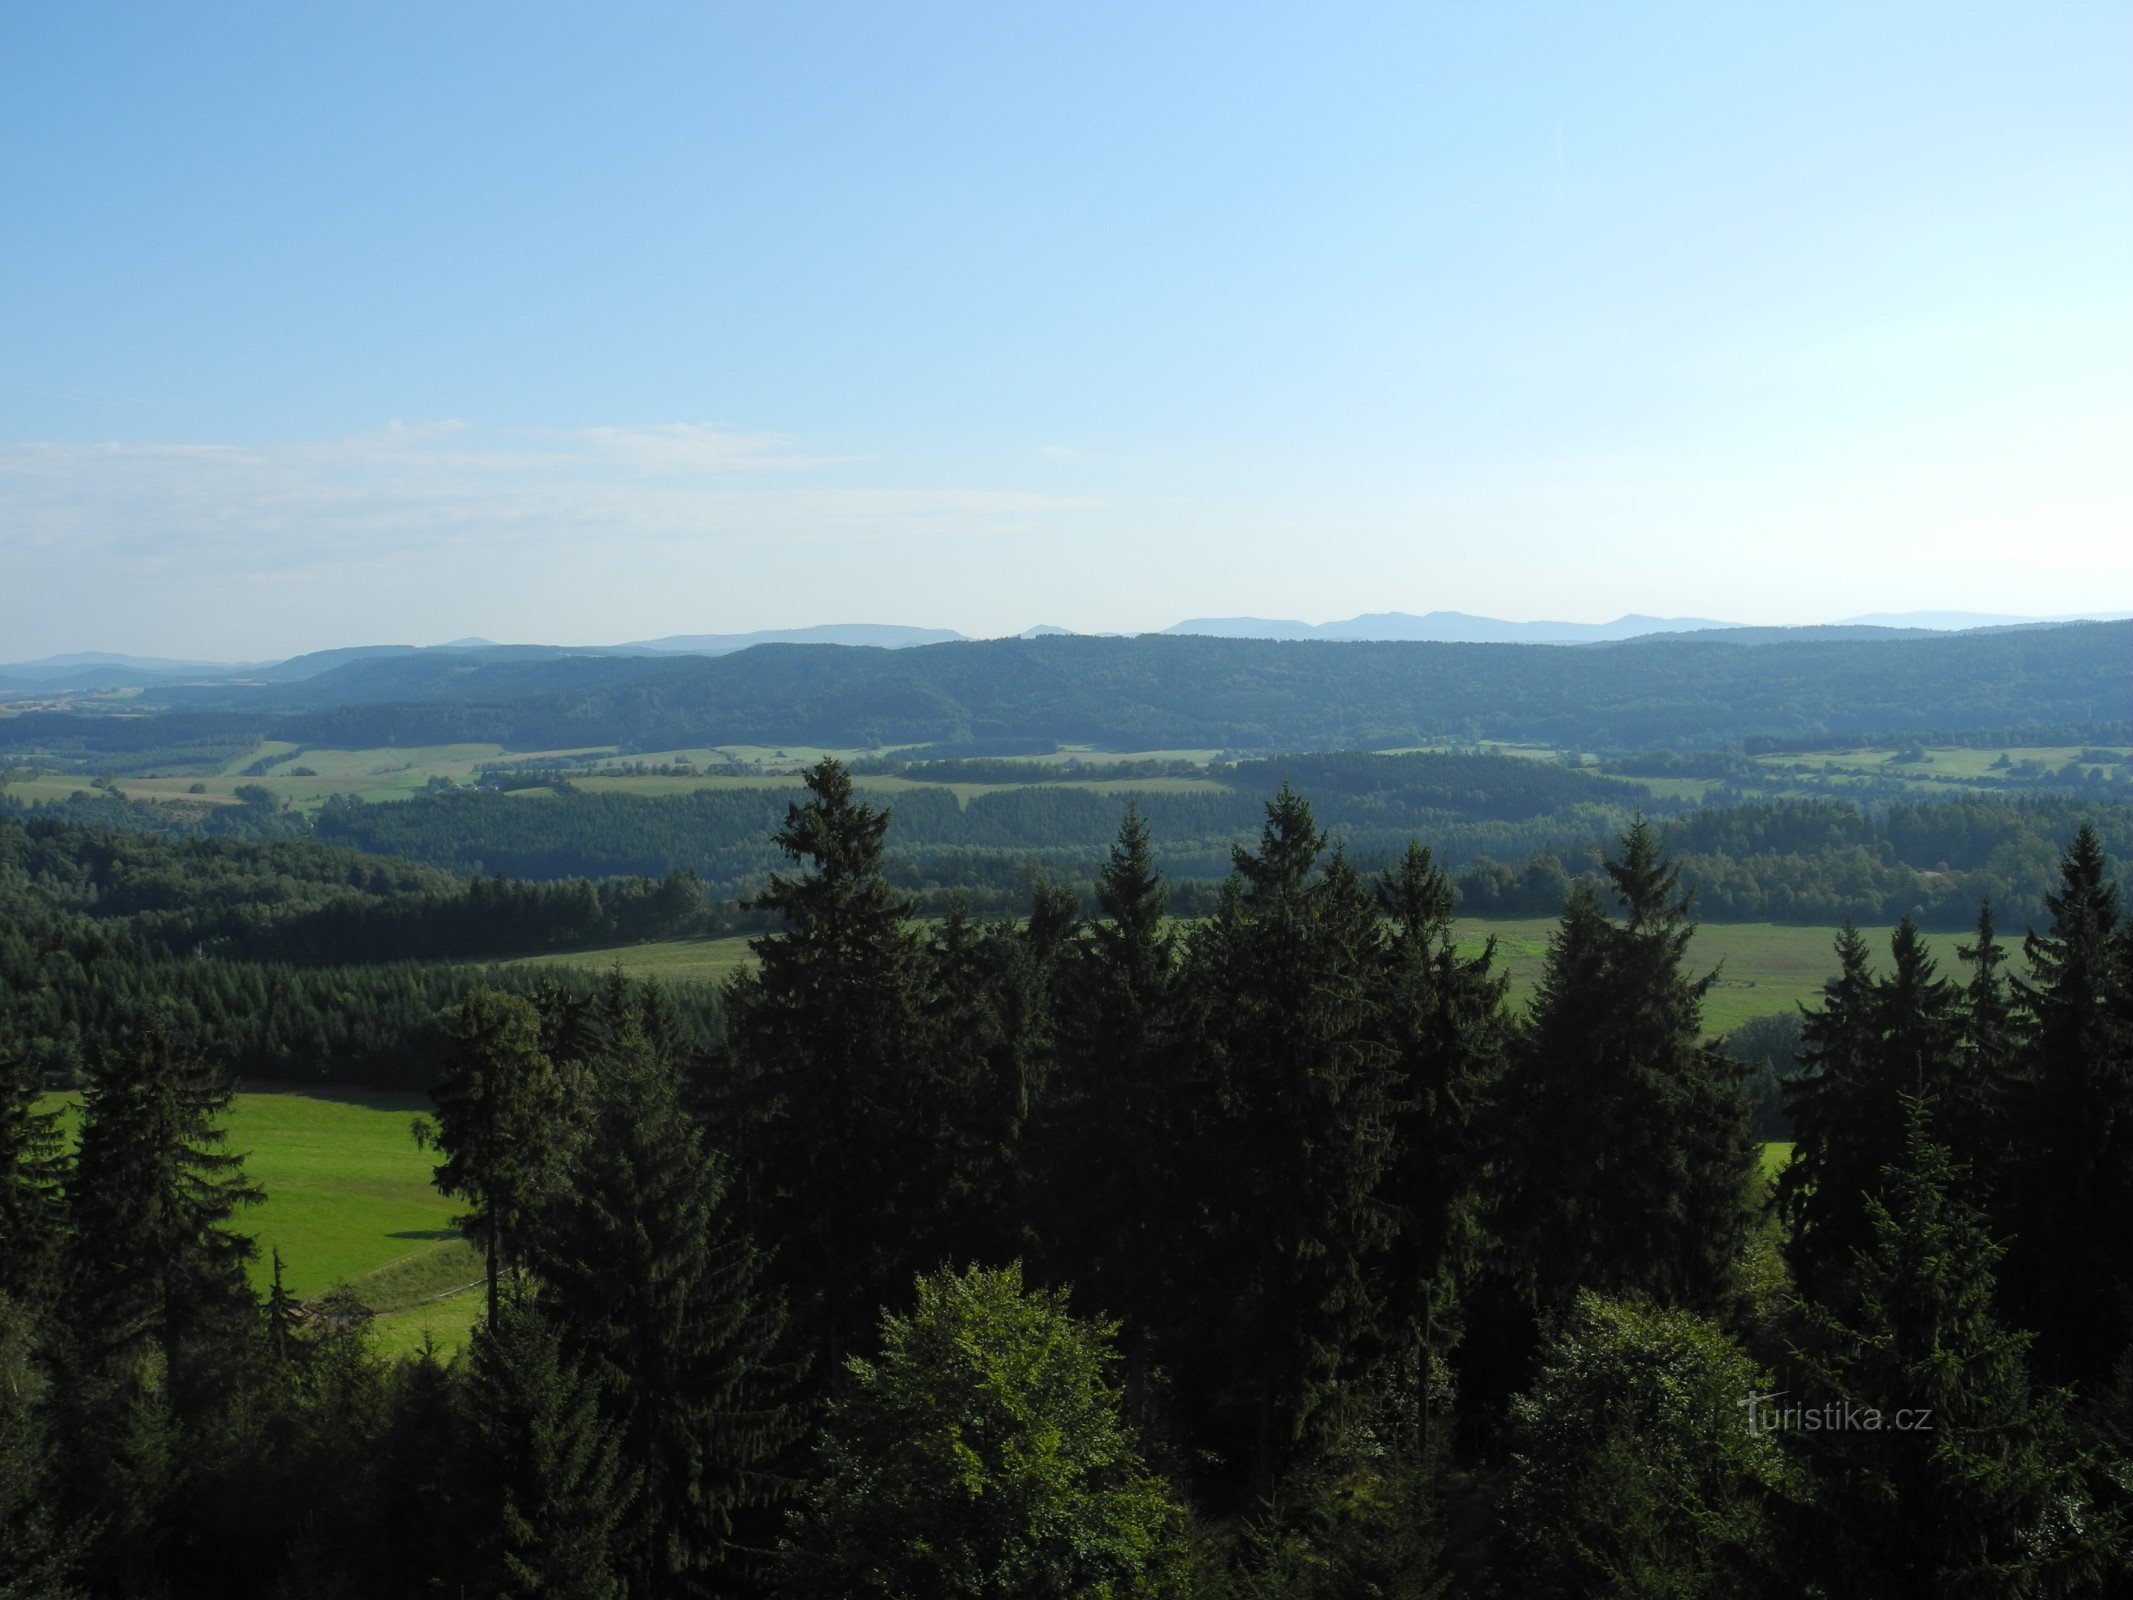 Jestřebí mountains attract new visitors to trips